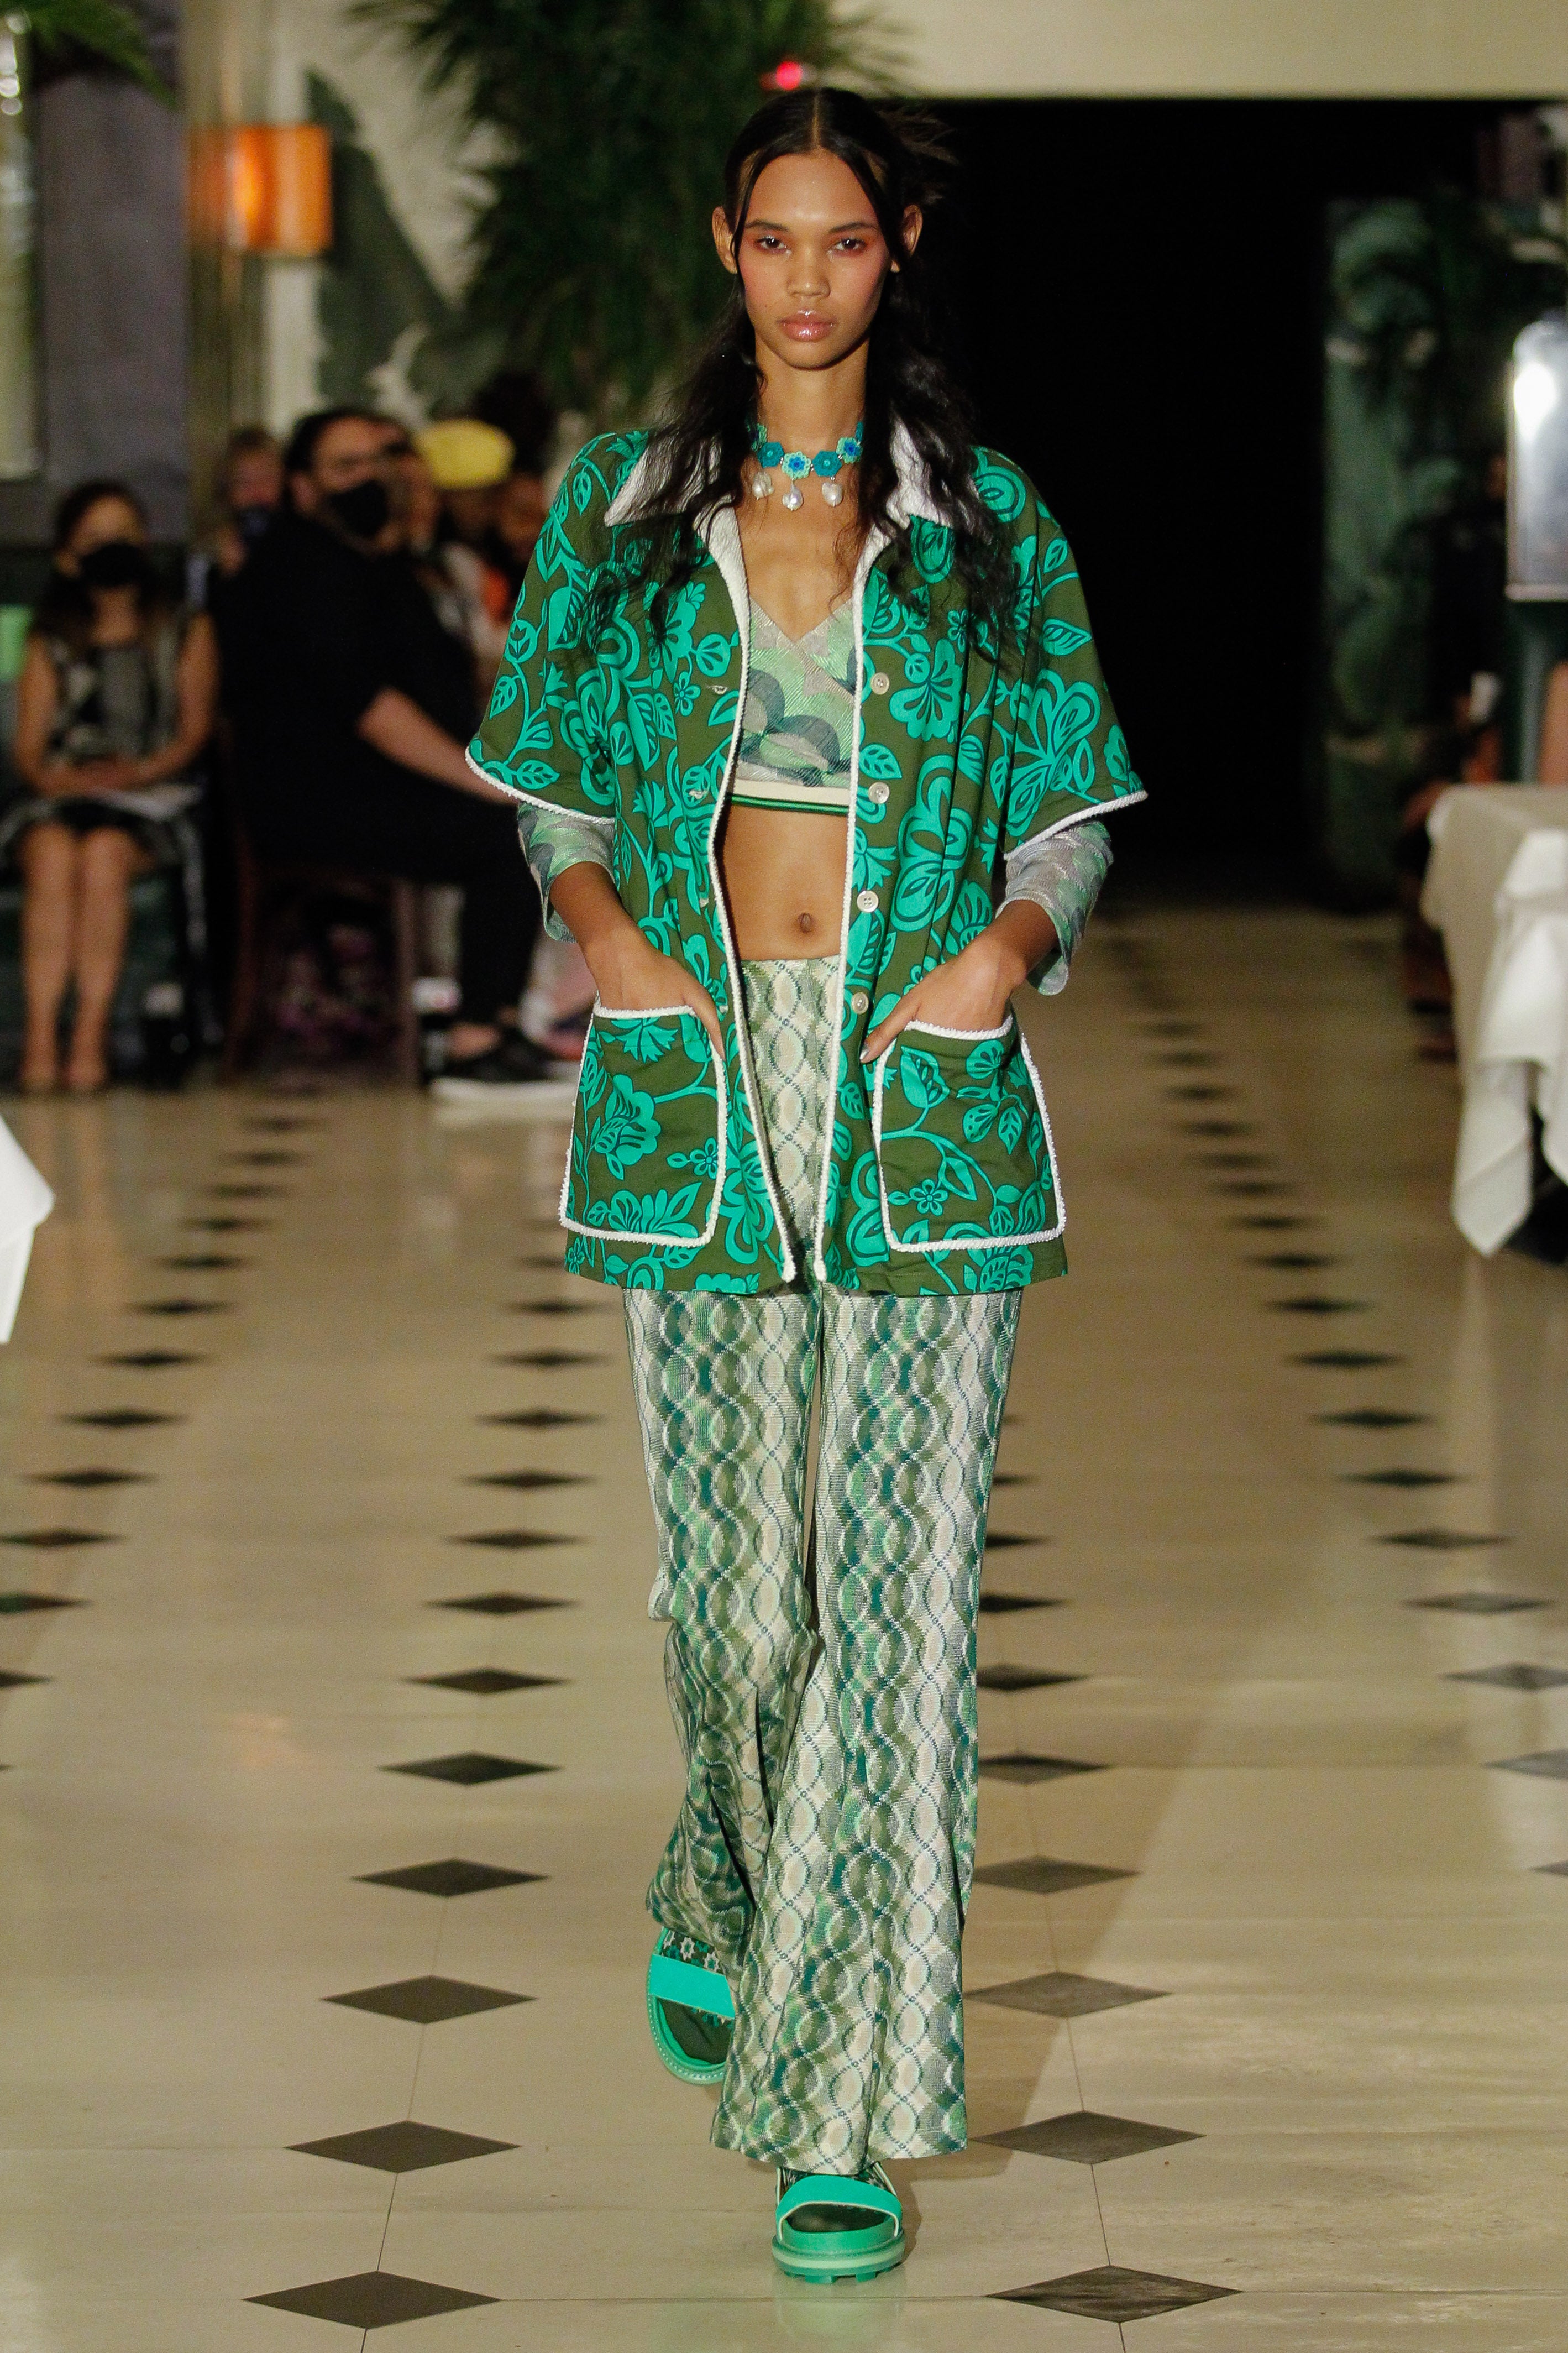 Wave Rider Knit Pant under the runway lights, can be worn with any green other Anna Sui attire